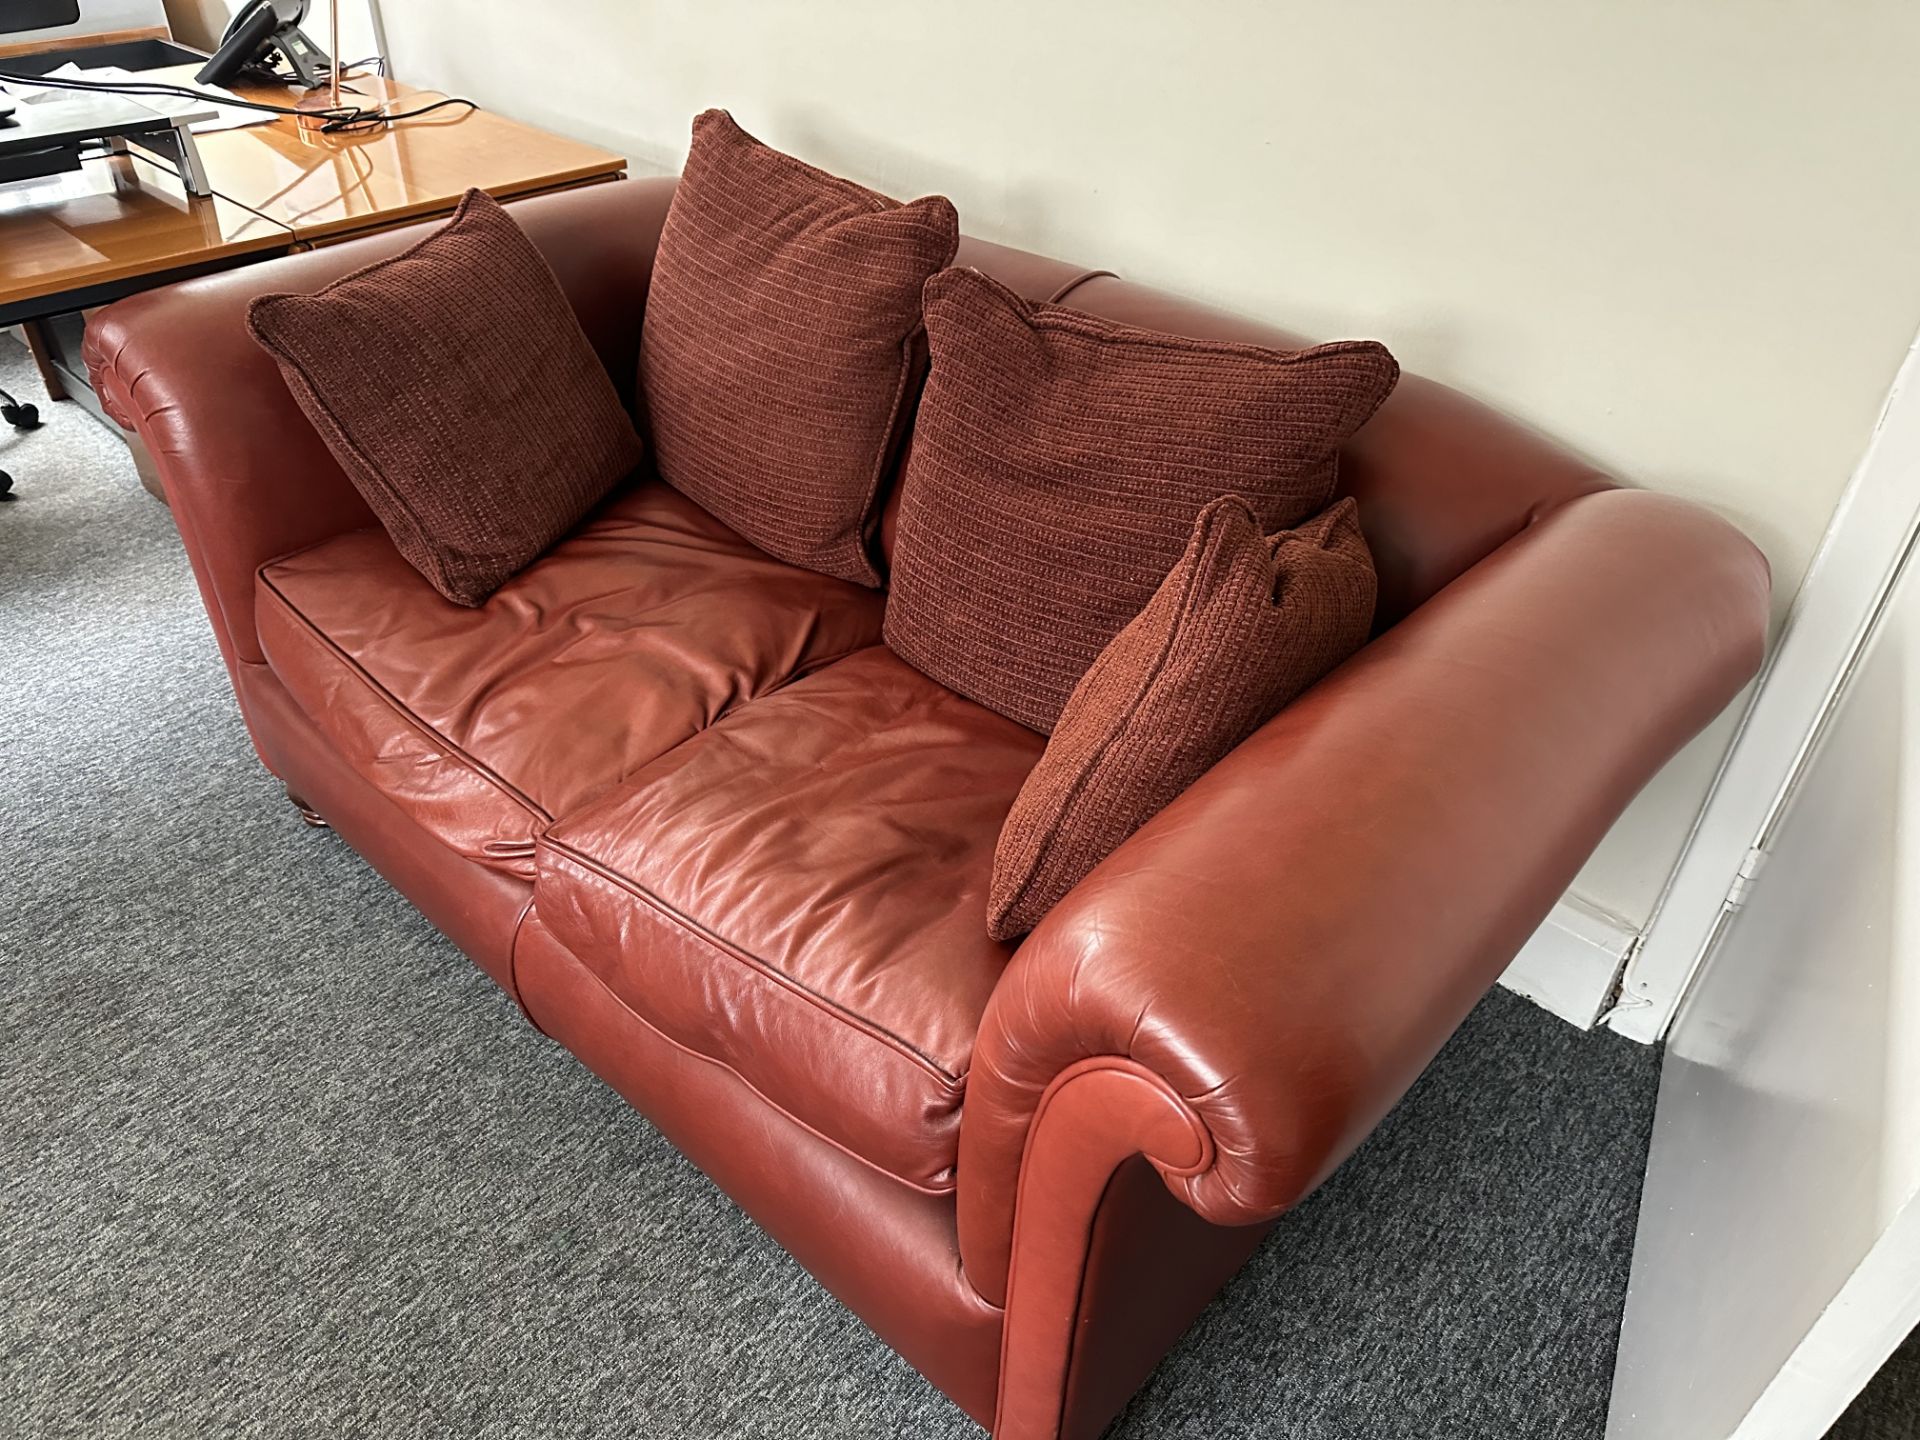 2 SEATER RED LEATHER SOFA - Image 2 of 2